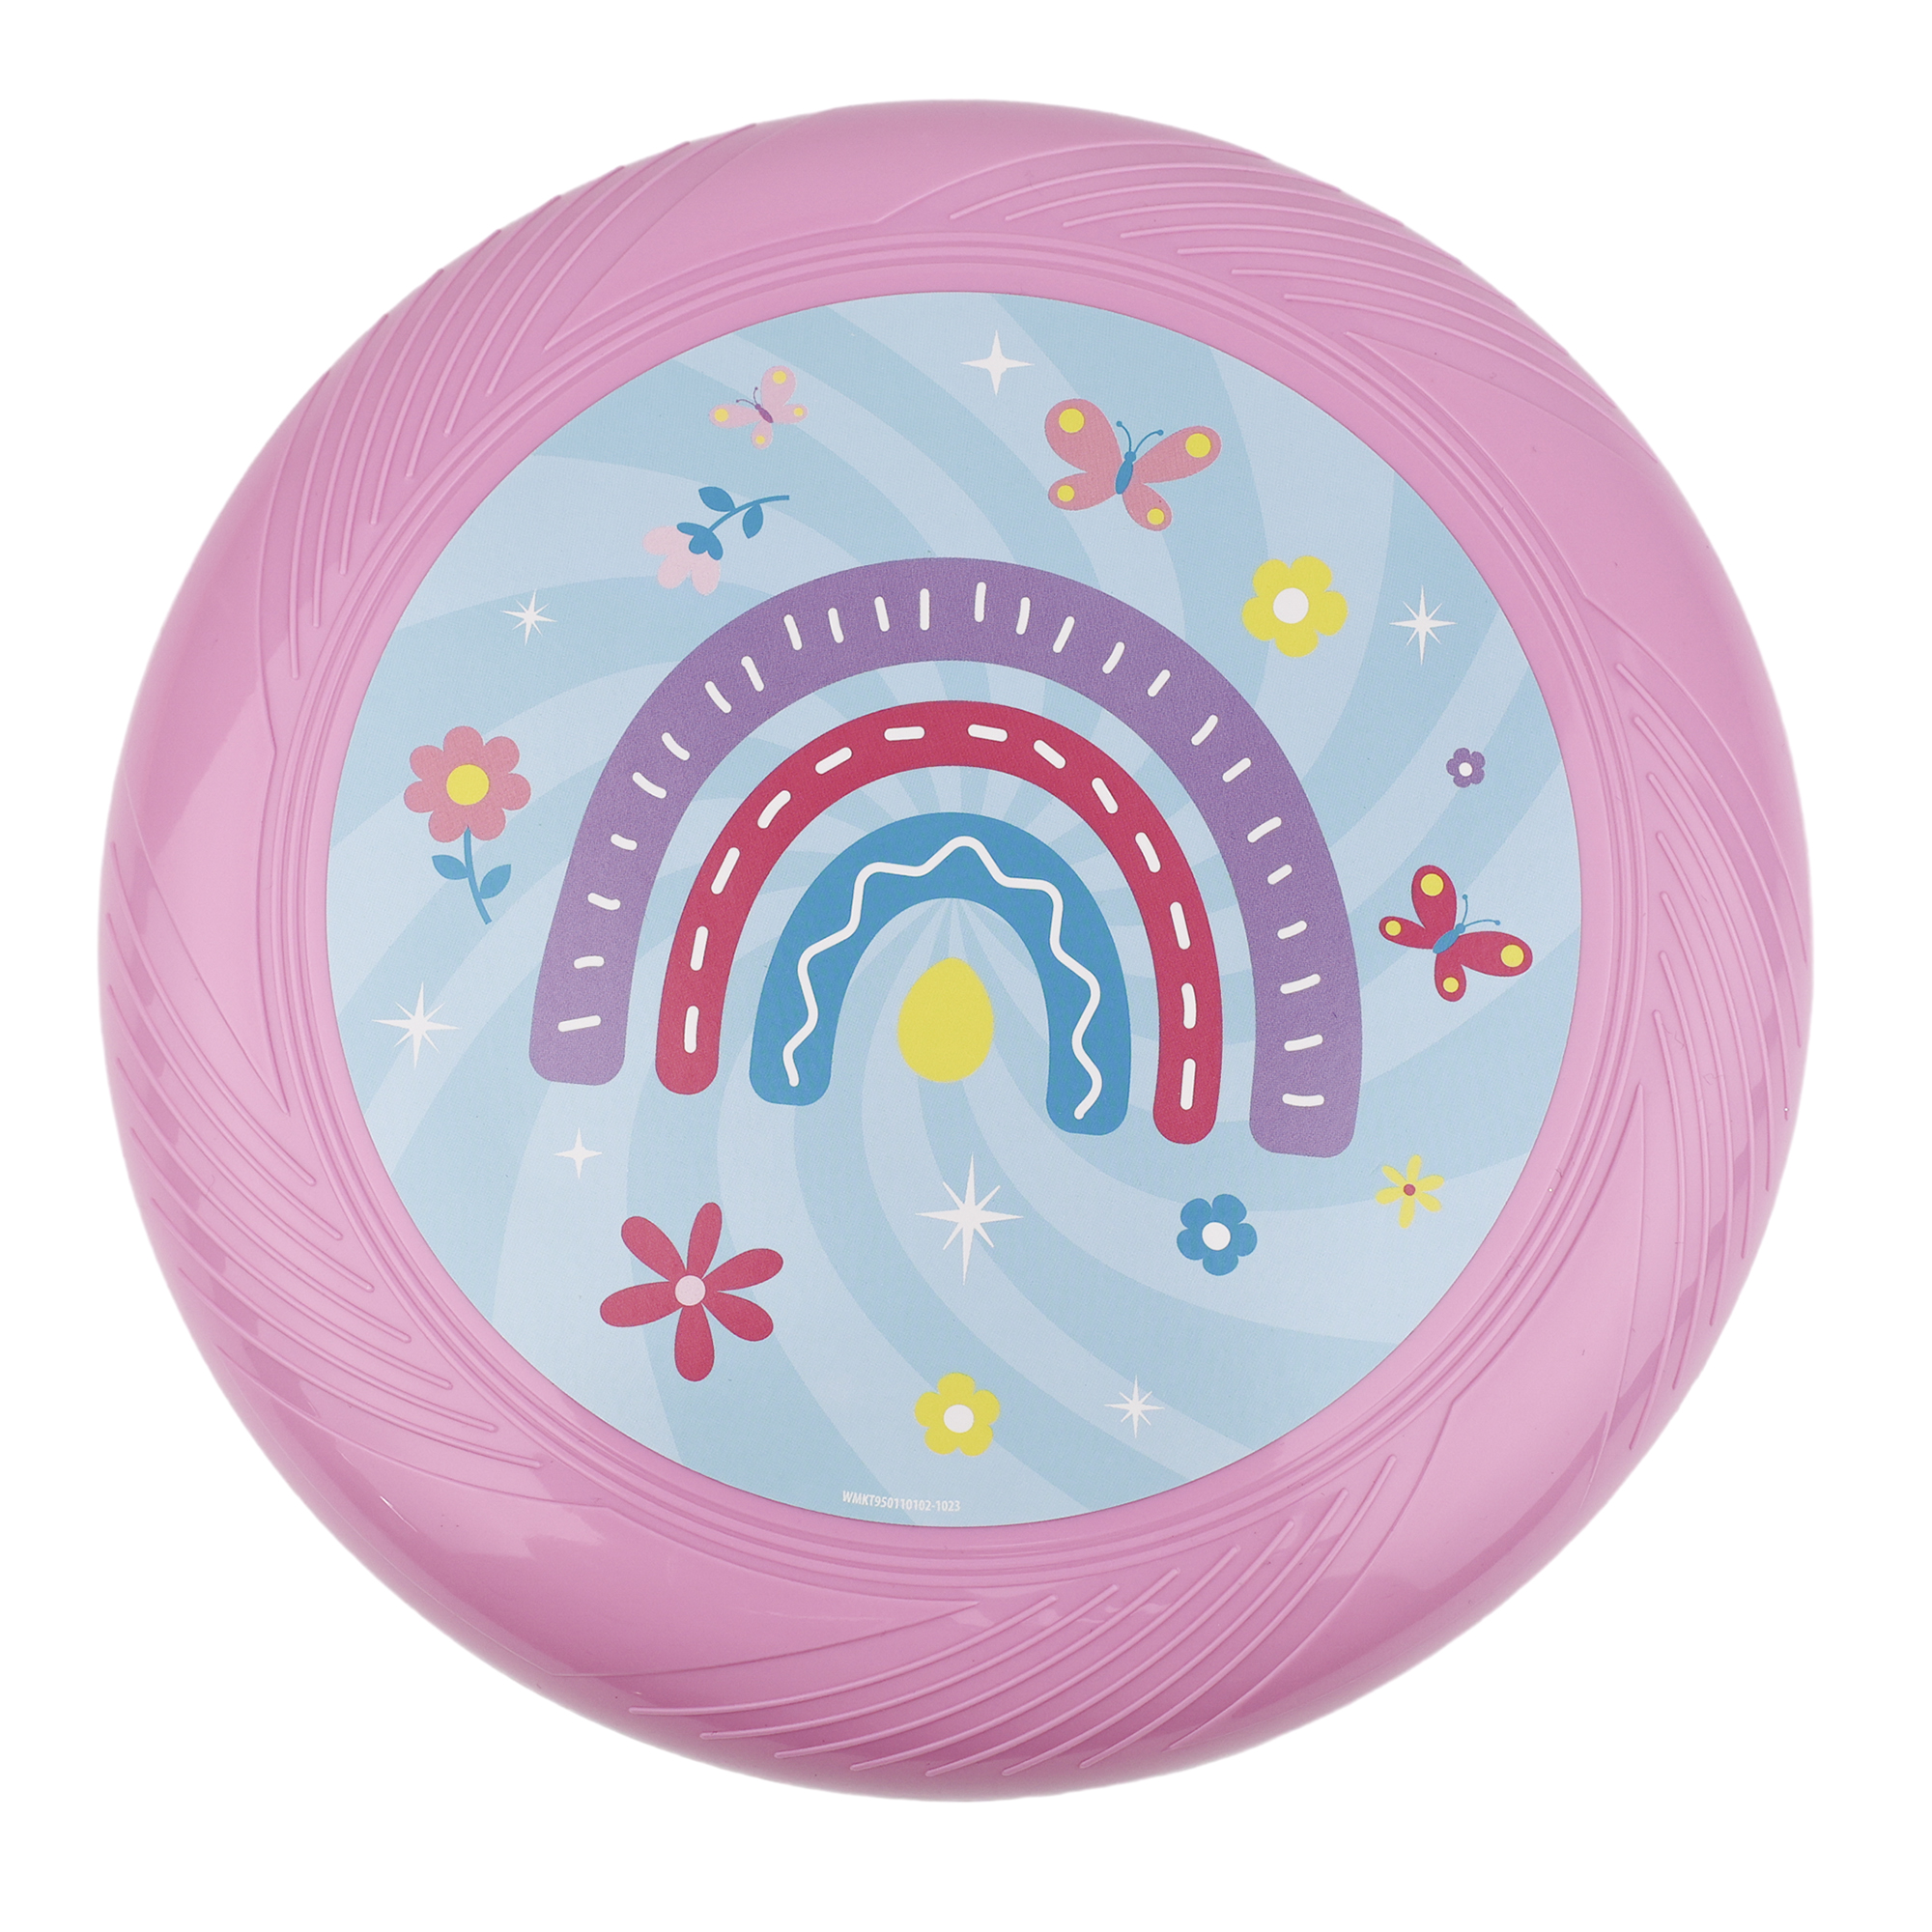 Easter Pink Rainbow Flying Disc, by Way To Celebrate - image 1 of 6